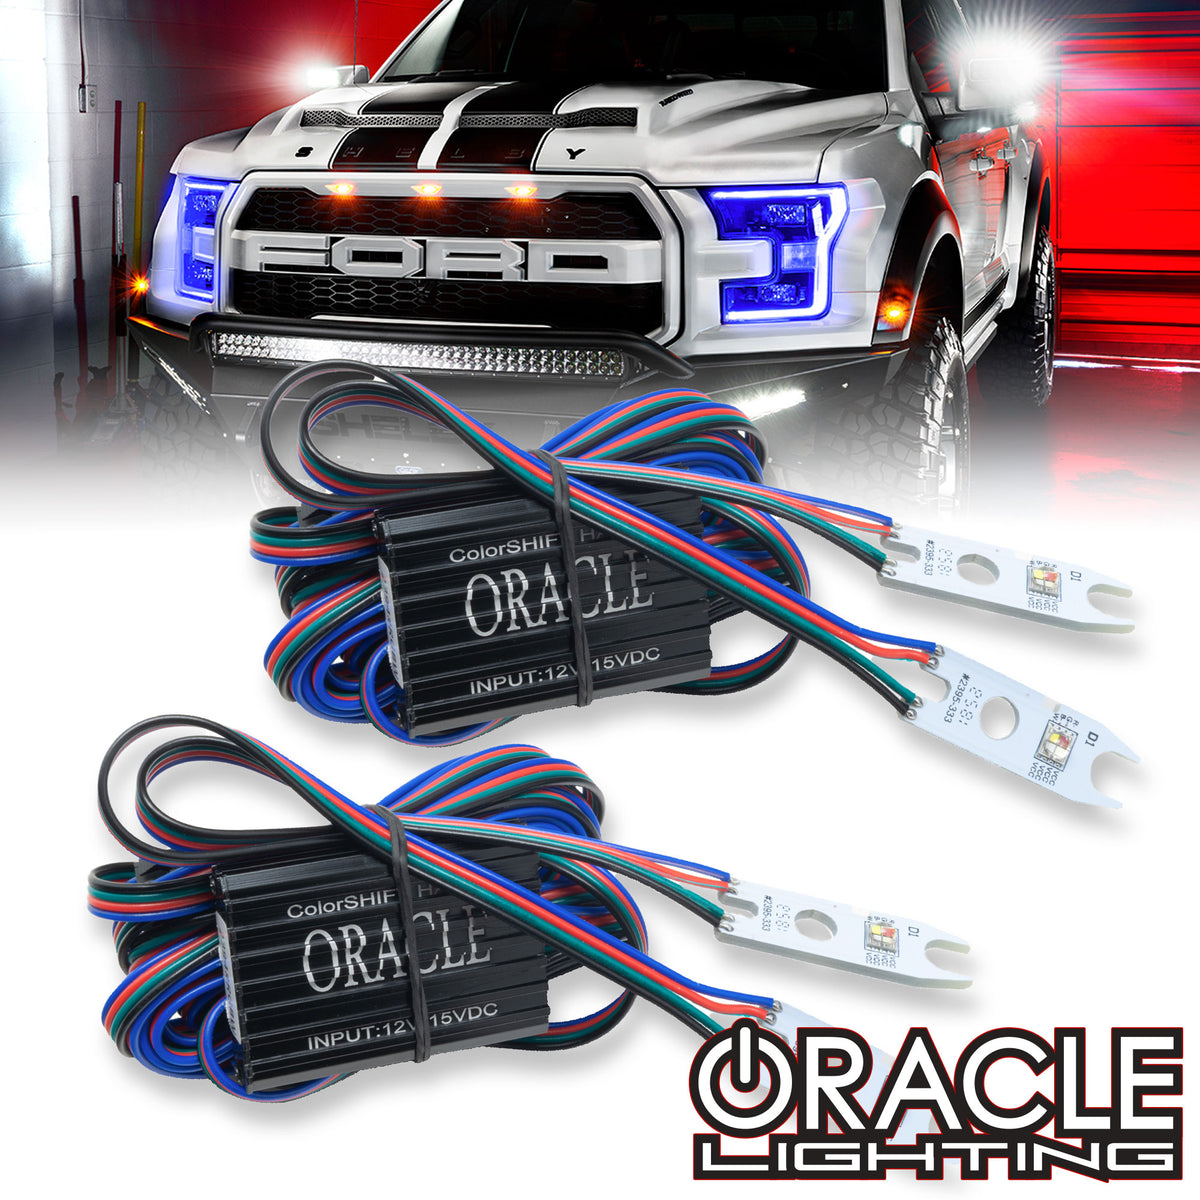 ORACLE Lighting 2015-2017 Ford F-150 ColorSHIFT Headlight DRL Upgrade Kit